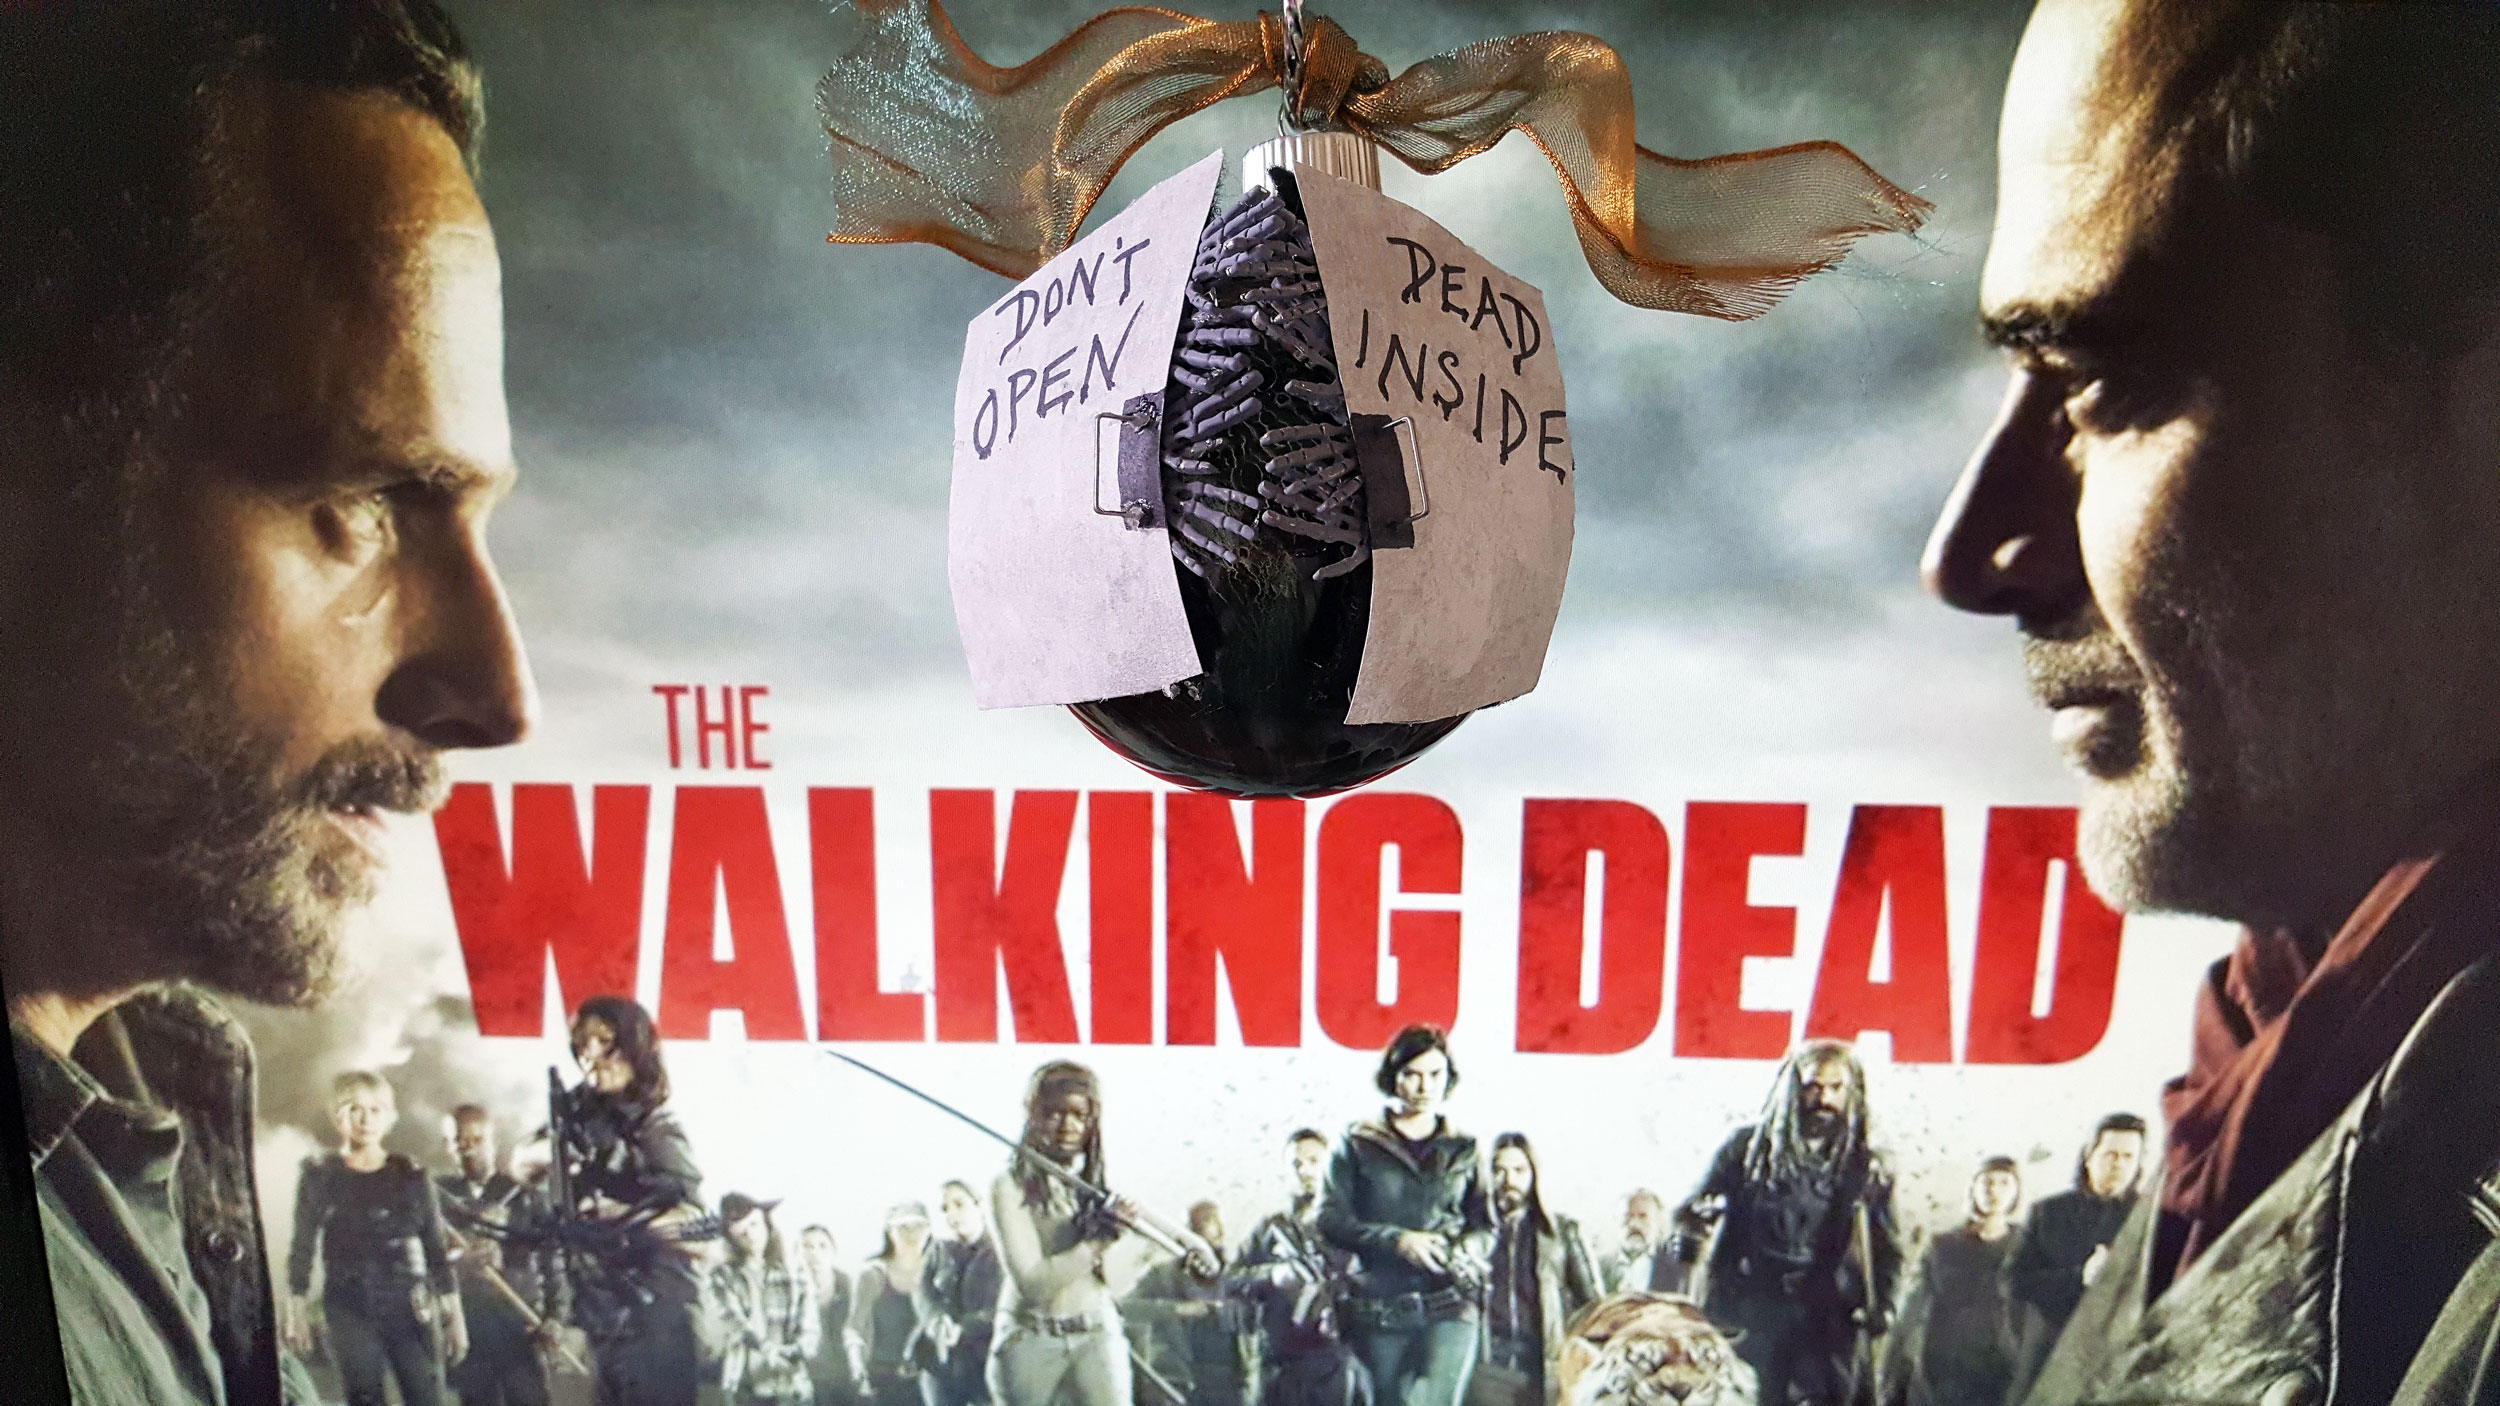 Completed Walking Dead Ornament with Walking Dead movie poster. | OrnamentShop.com